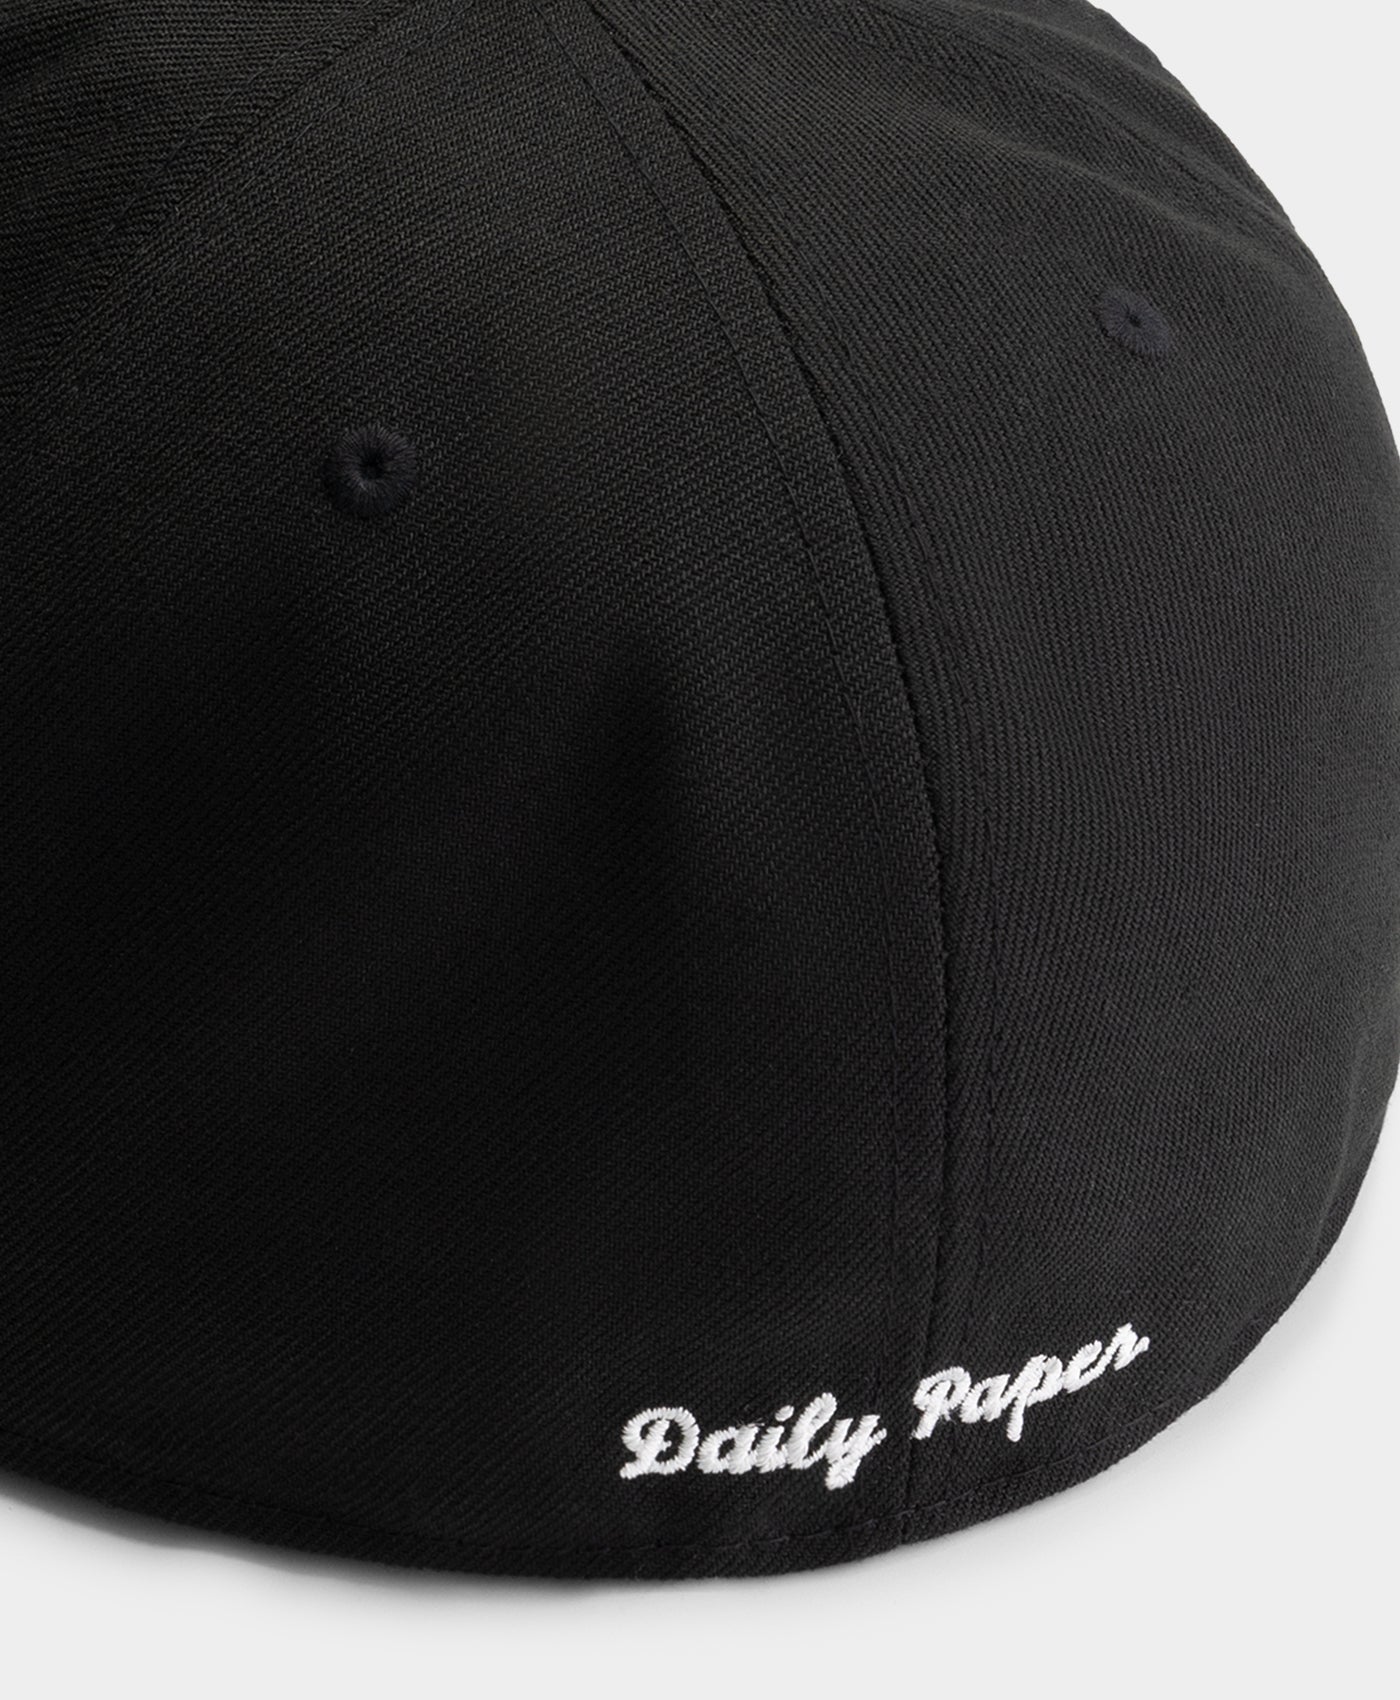 DP - Black Daily Paper x New Era 59FIFTY Fitted Cap - Packshot